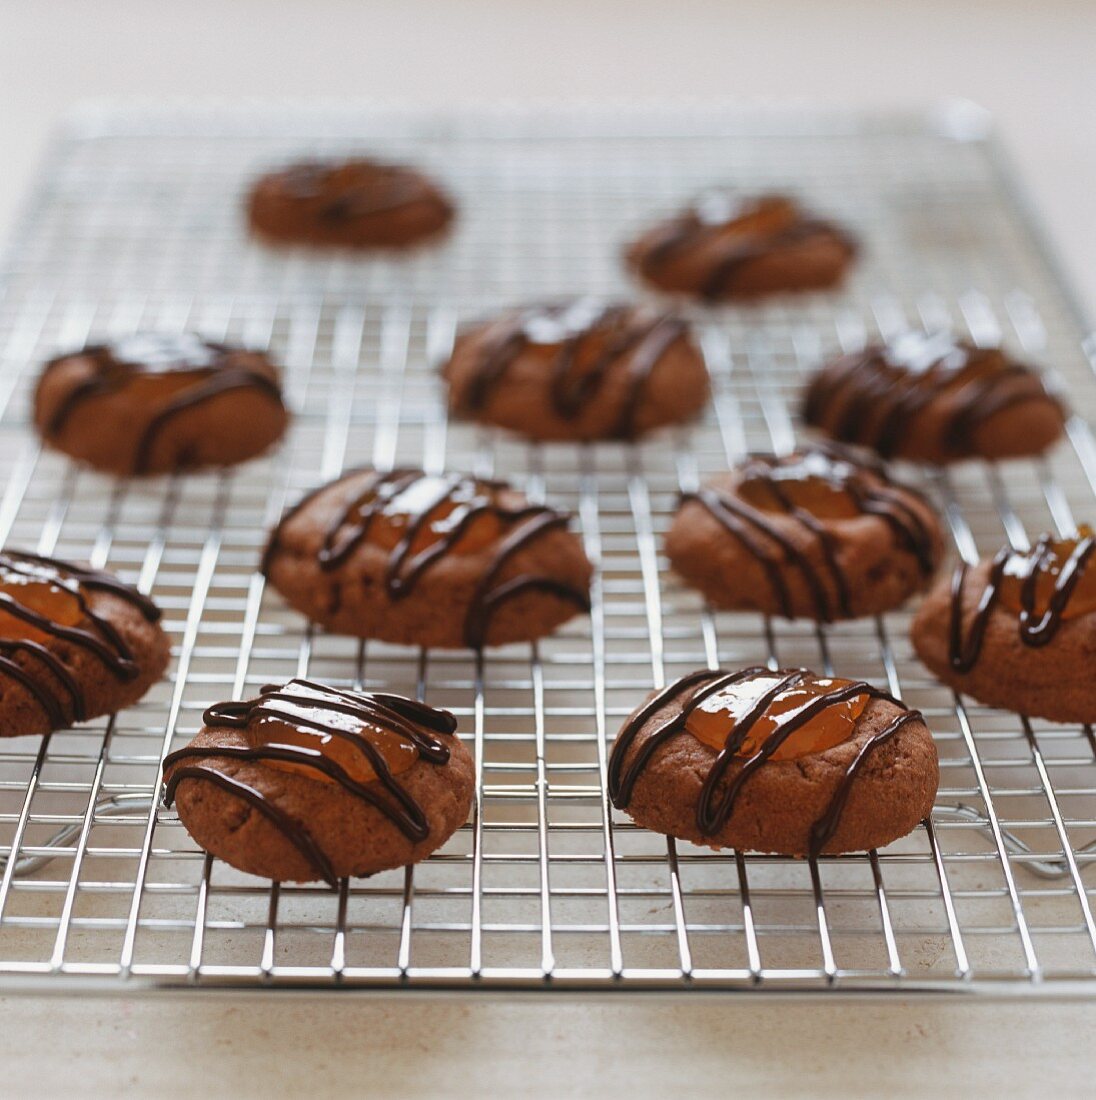 Sacher-style chocolate biscuits on a wire rack